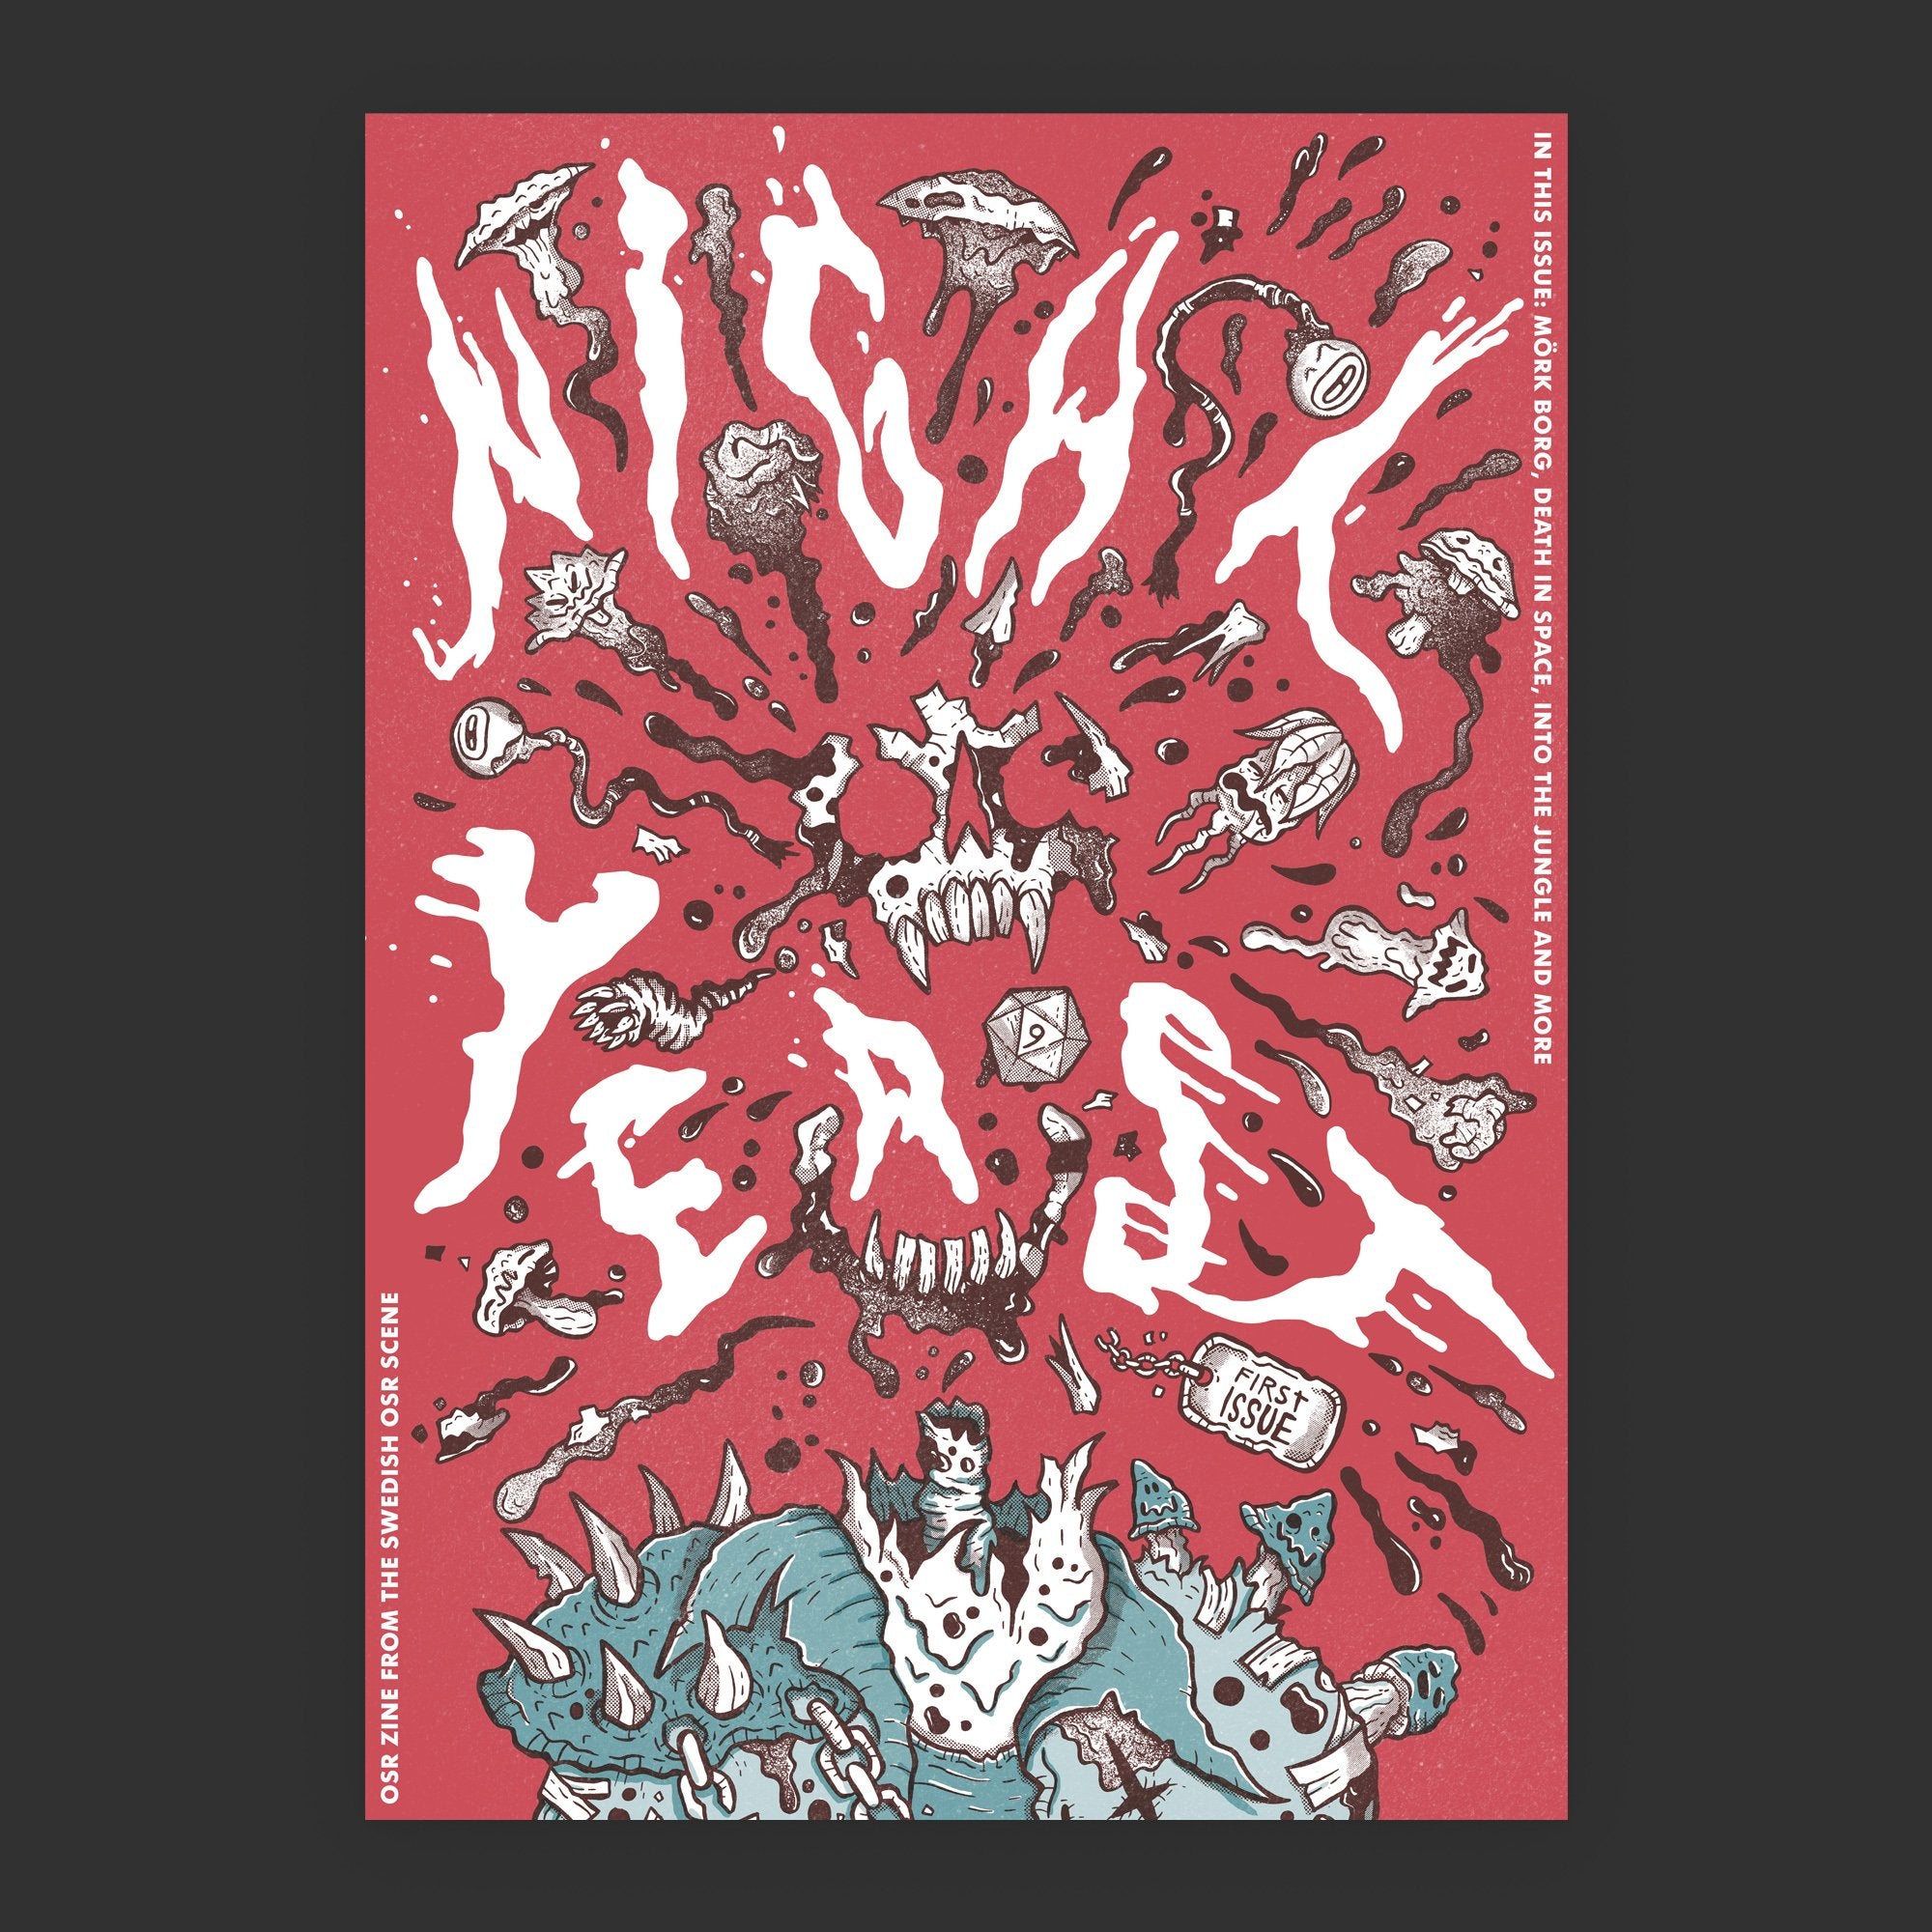 Night Yeast an OSR Zine from the Sweidsh OSR Scene, Mork Borg, Death in Space, Into the Jungle, and more. Cover by skullfungus. Risograph 1st issue